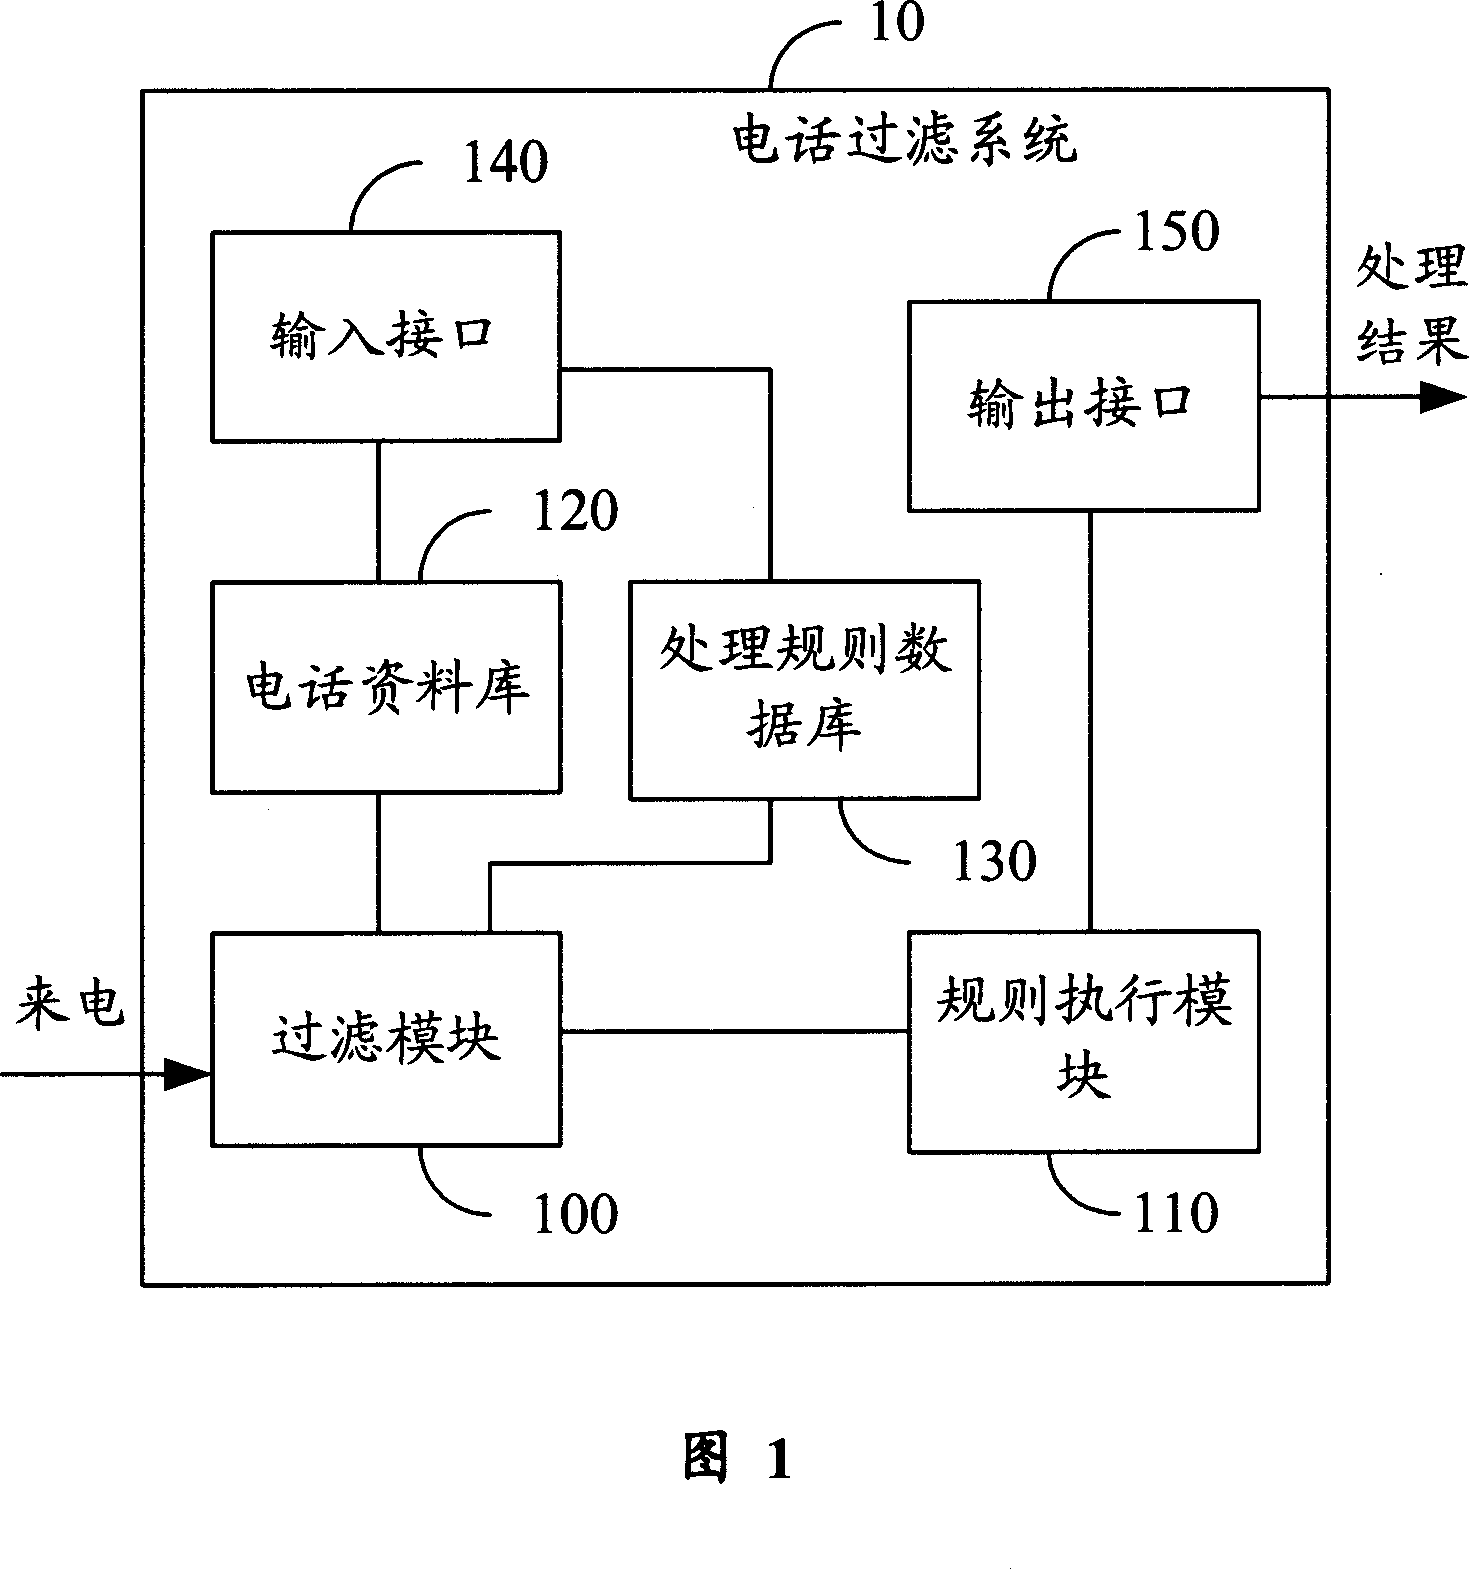 Telephone filter system and method